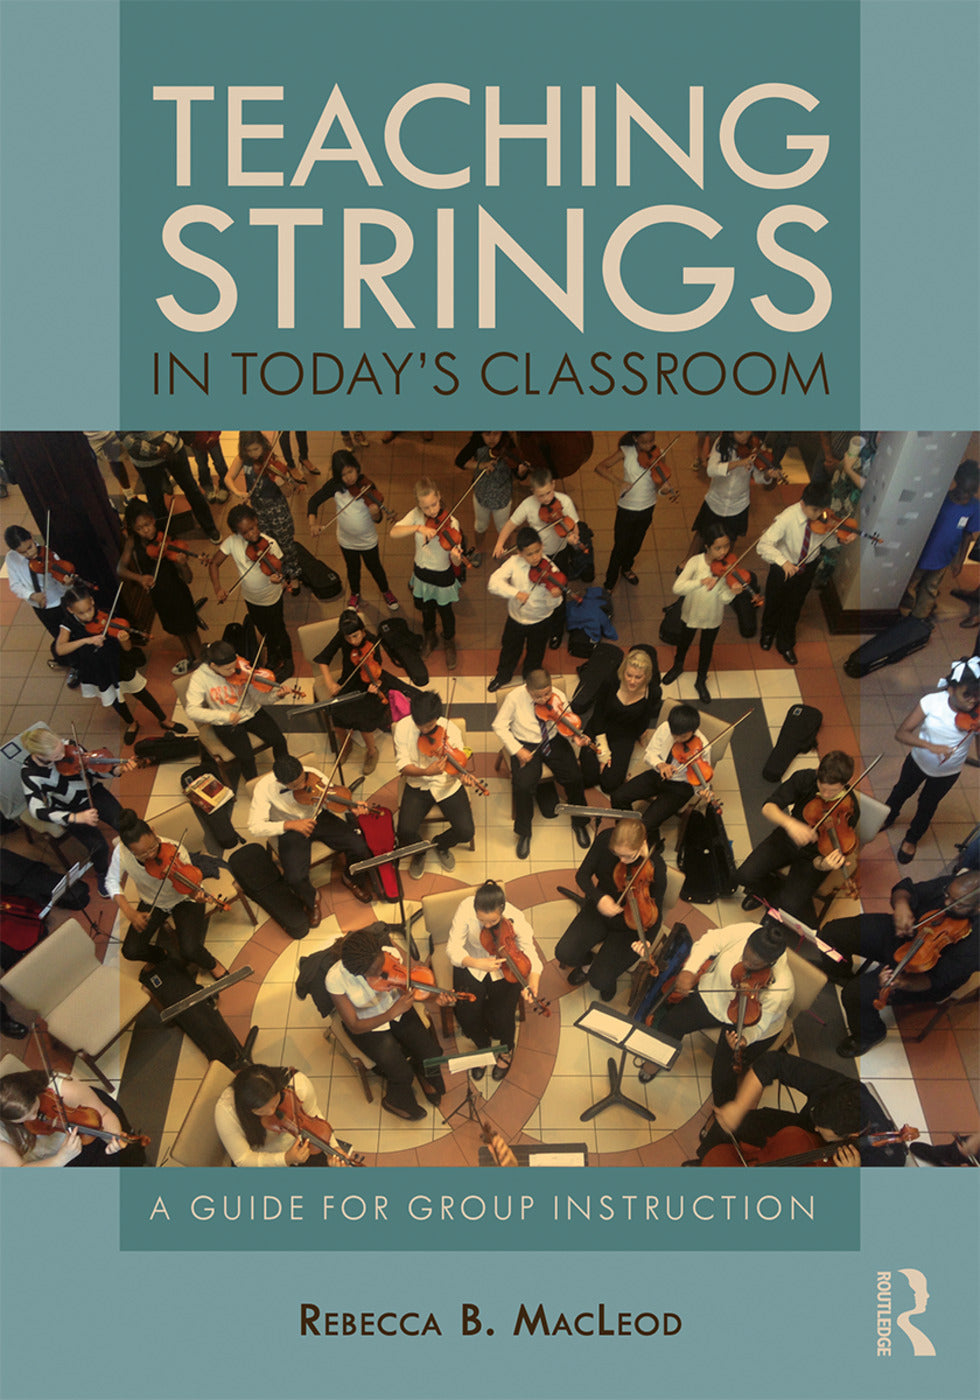 Teaching Strings in Today's Classroom : A Guide for Group Instruction by Rebecca MacLeod